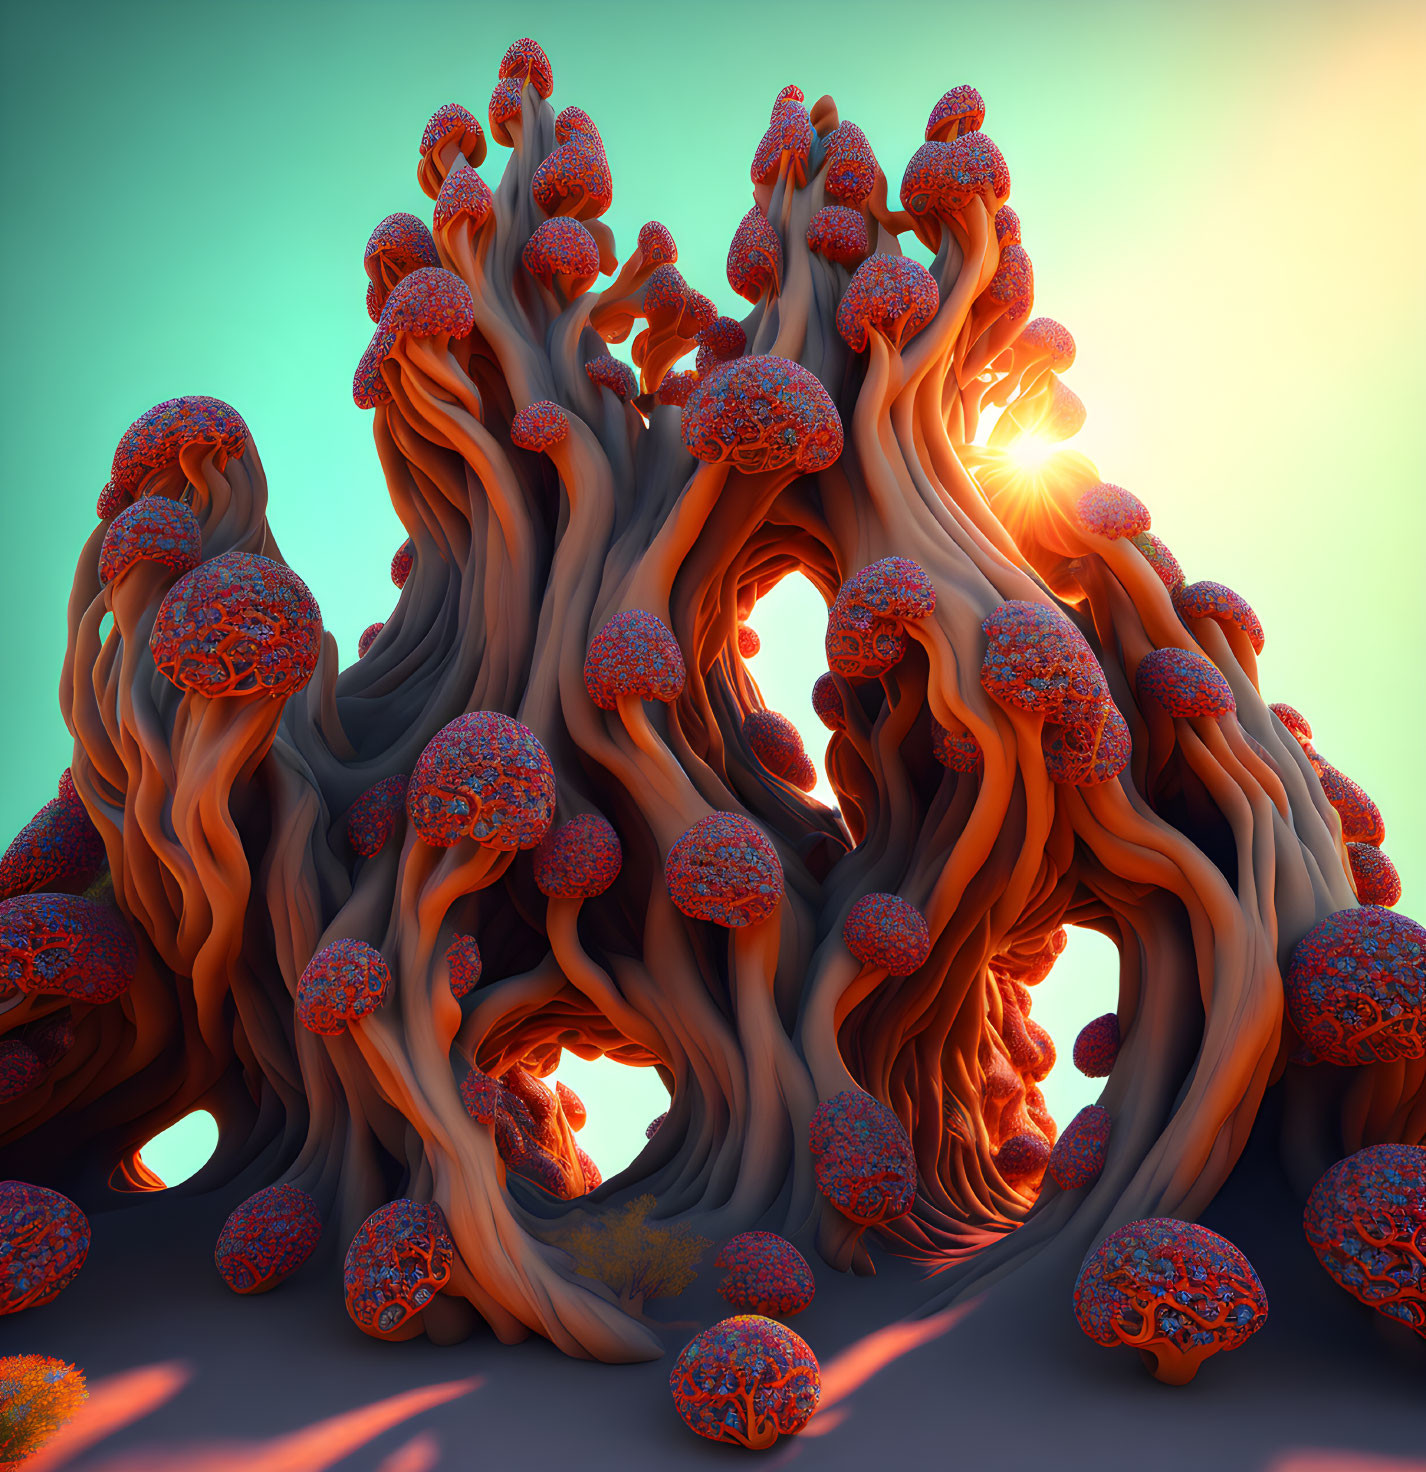 Surreal illustration of vibrant tree with coral-like growths